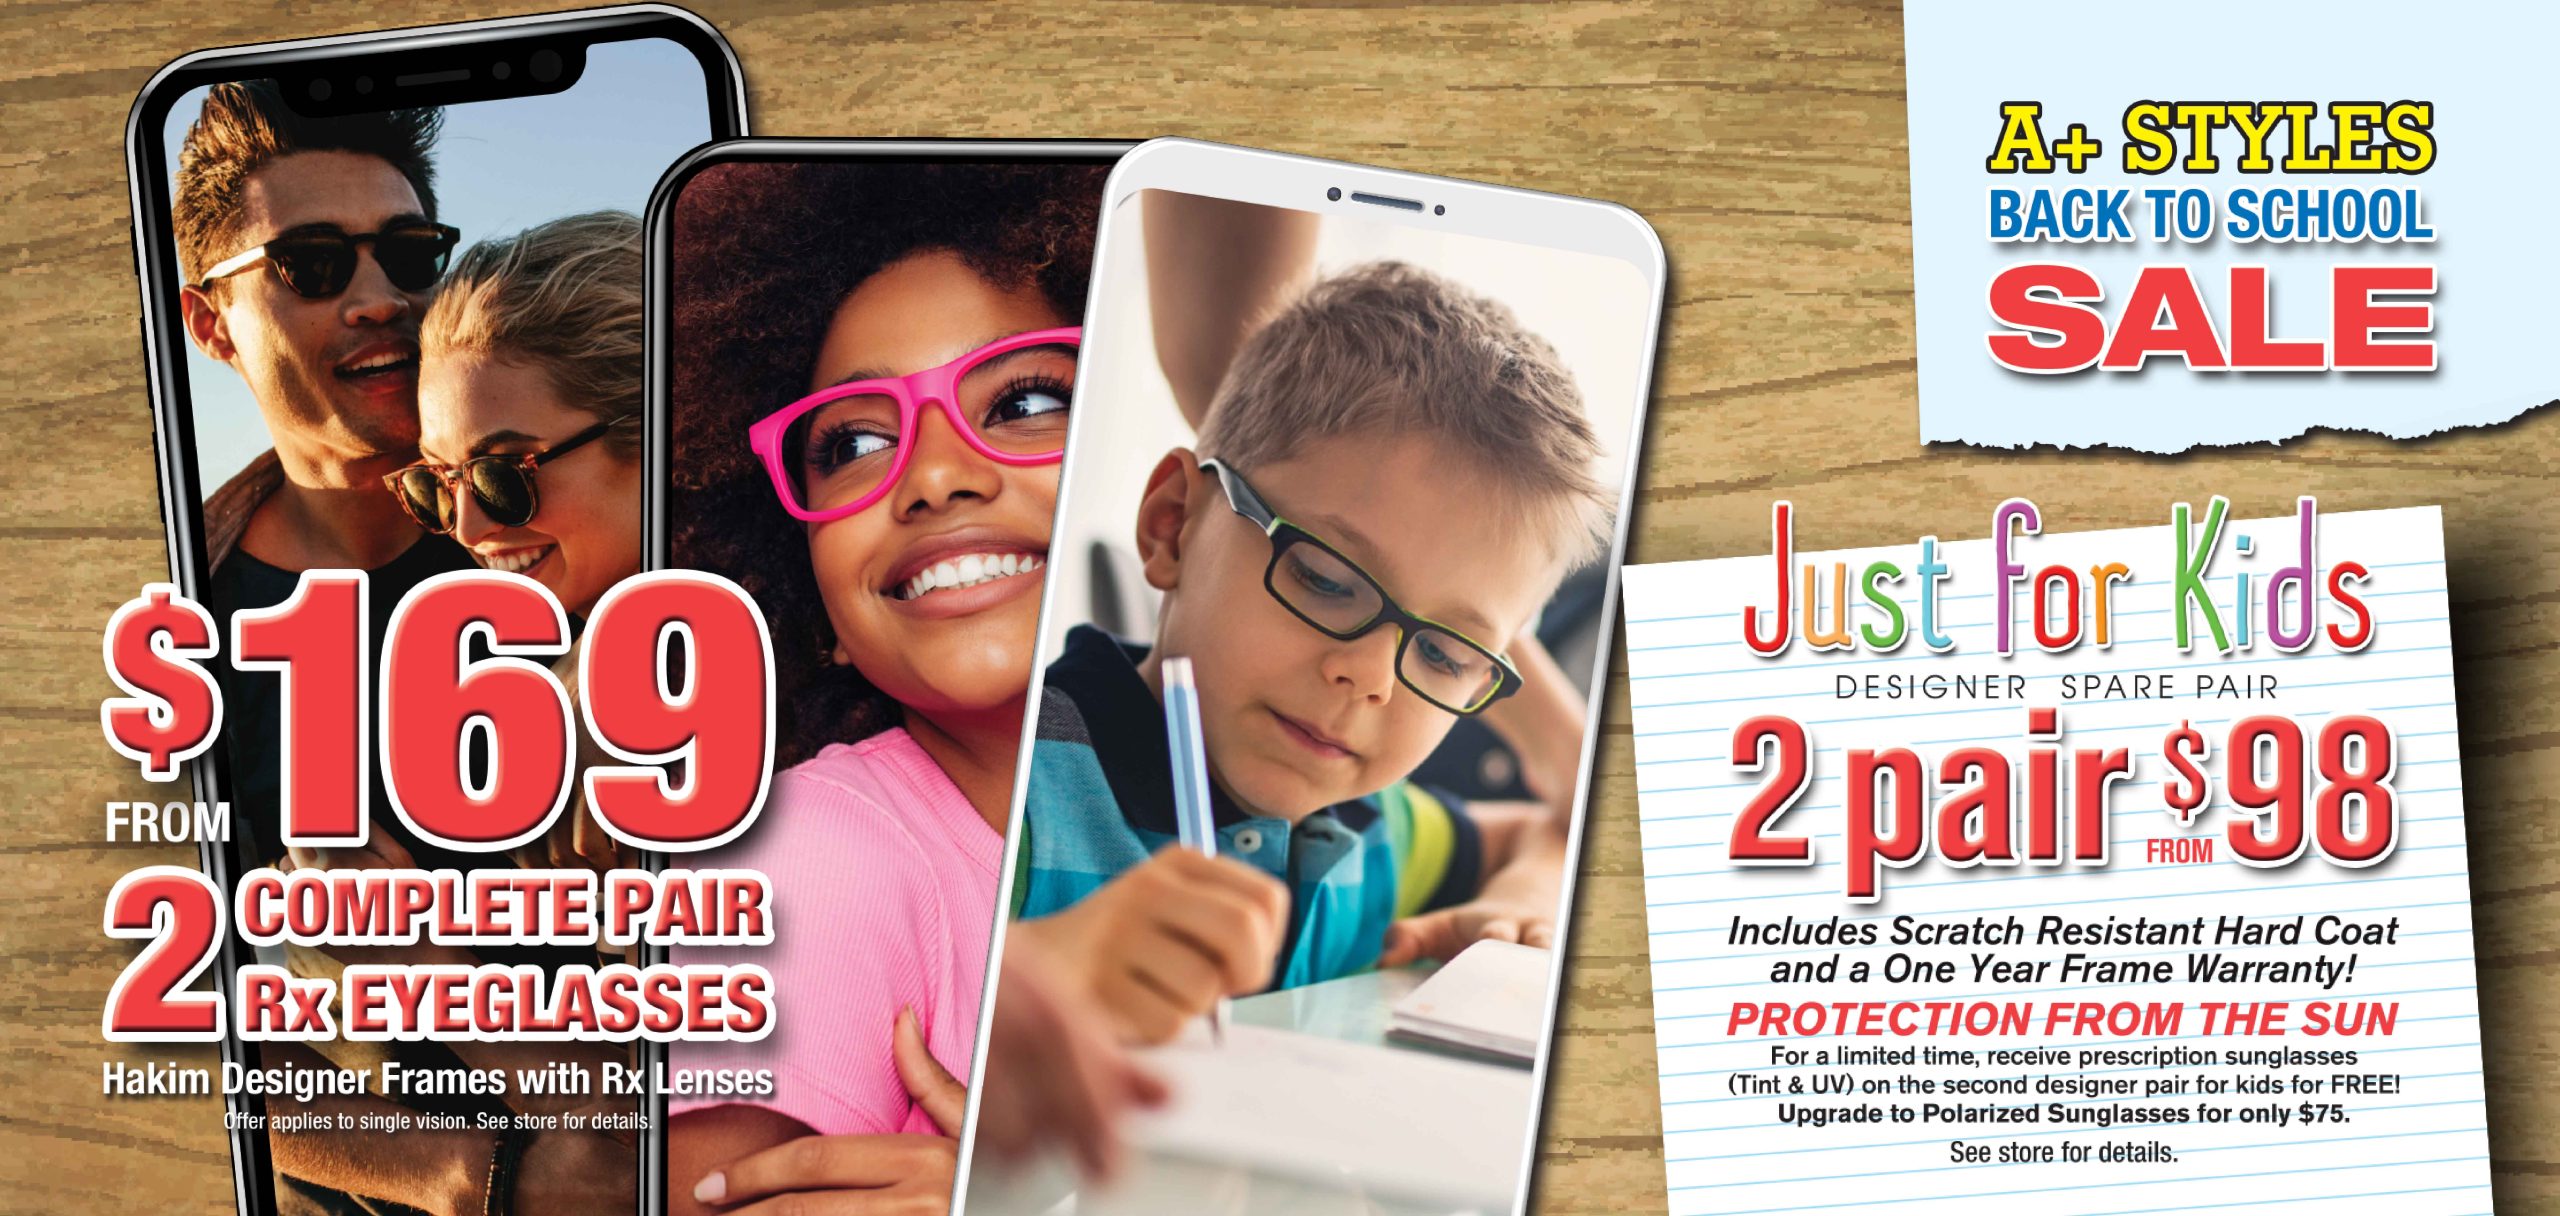 Back to School Sale - Get 2-pair of RX eyeglasses from $169